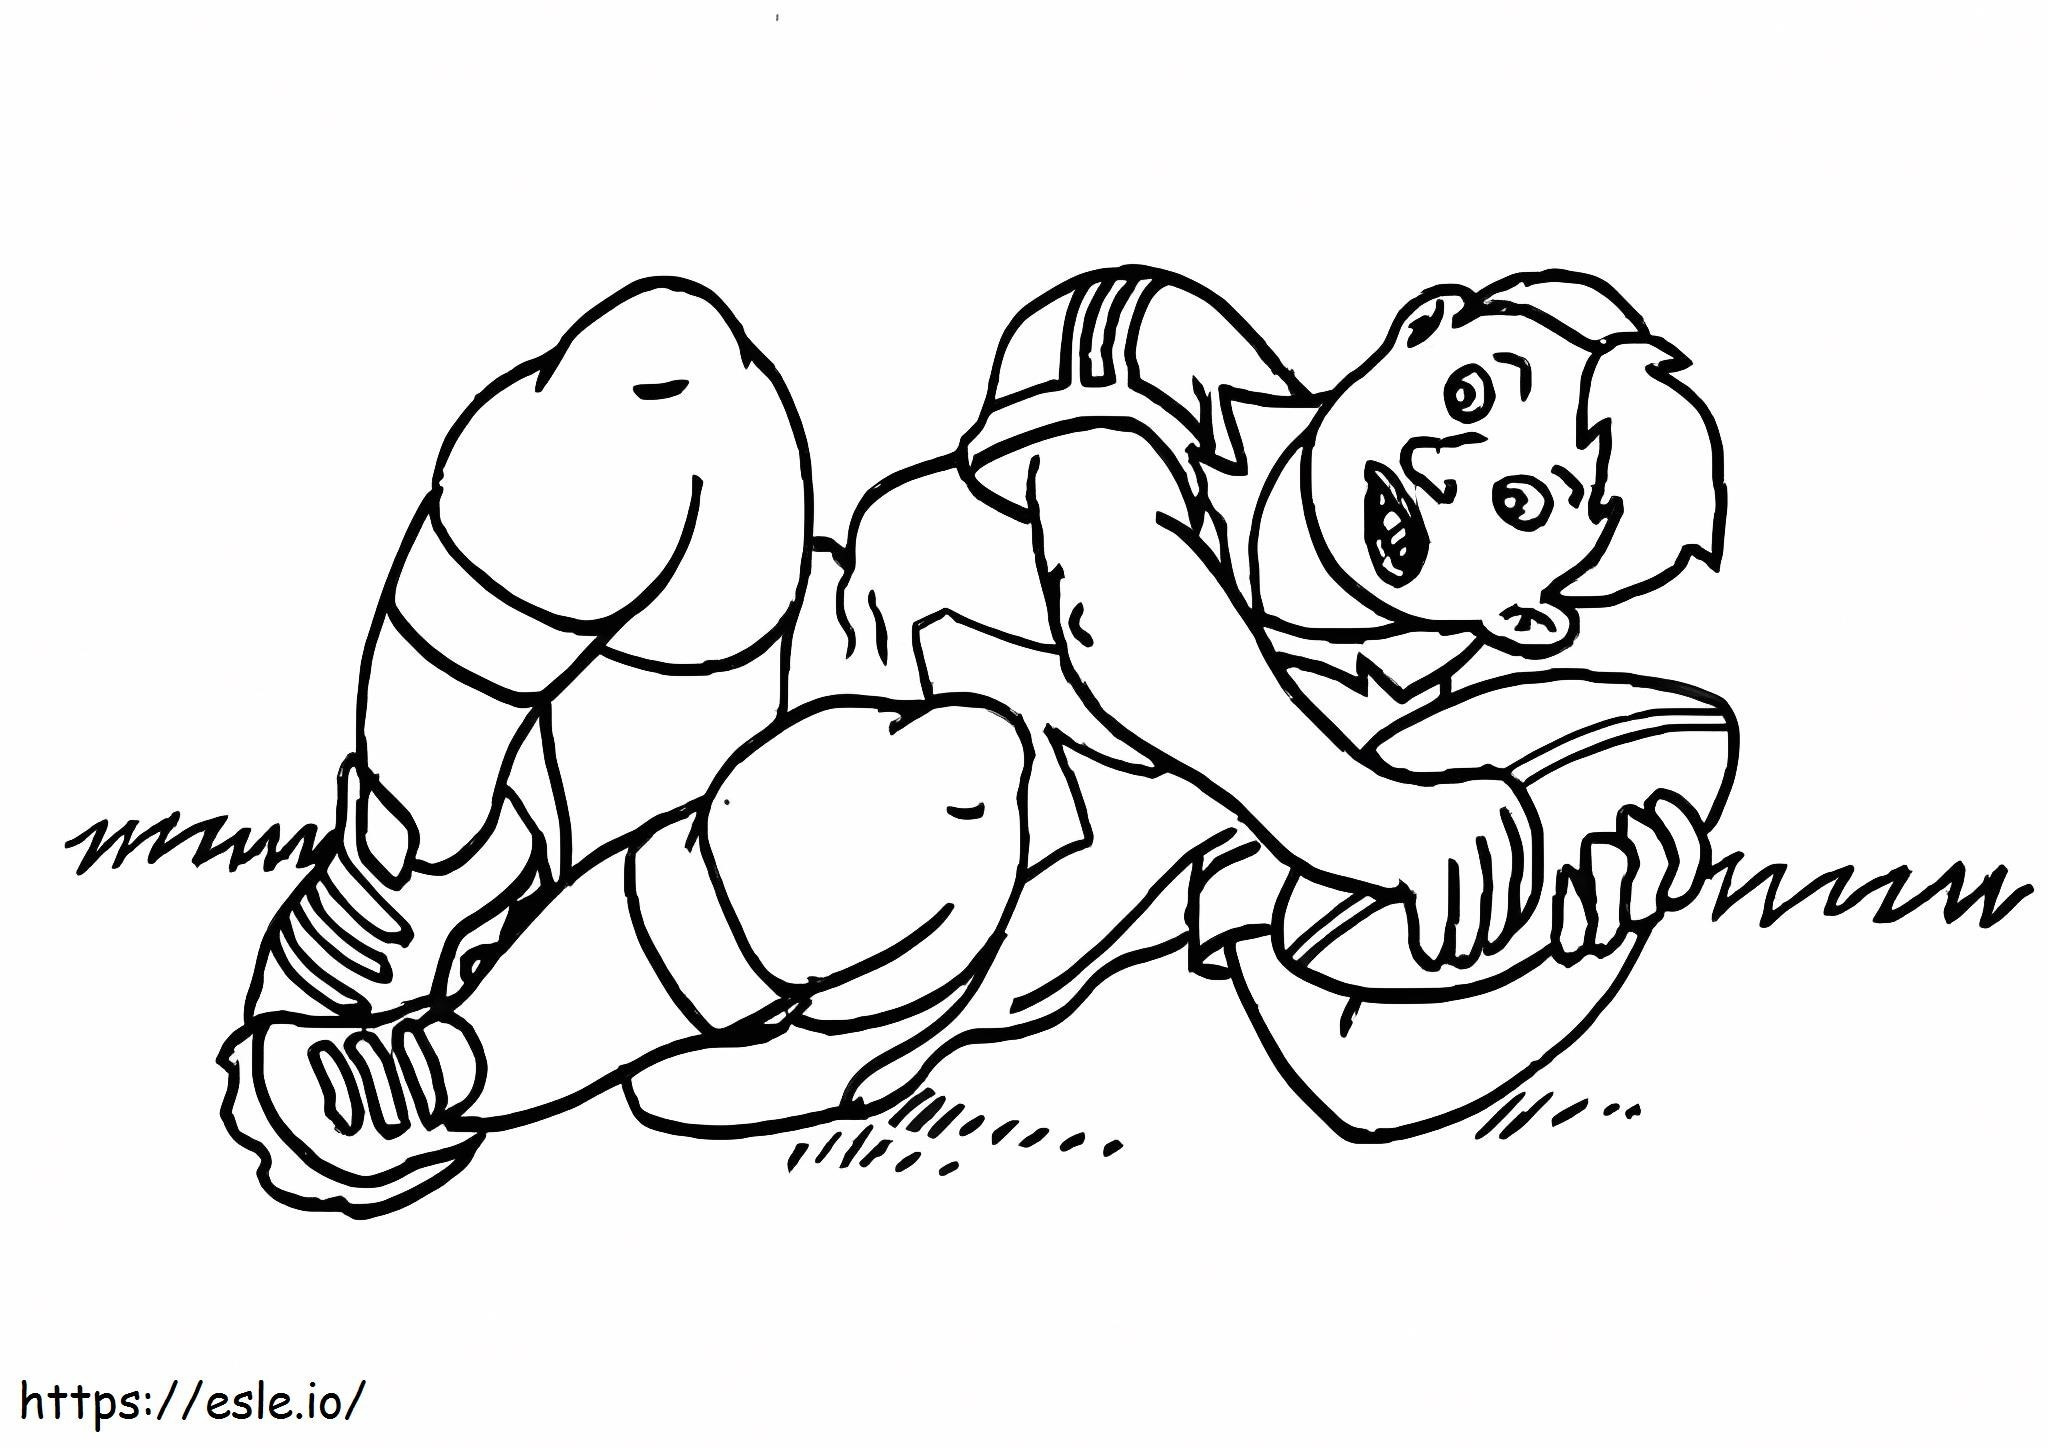 A Rugby Player coloring page